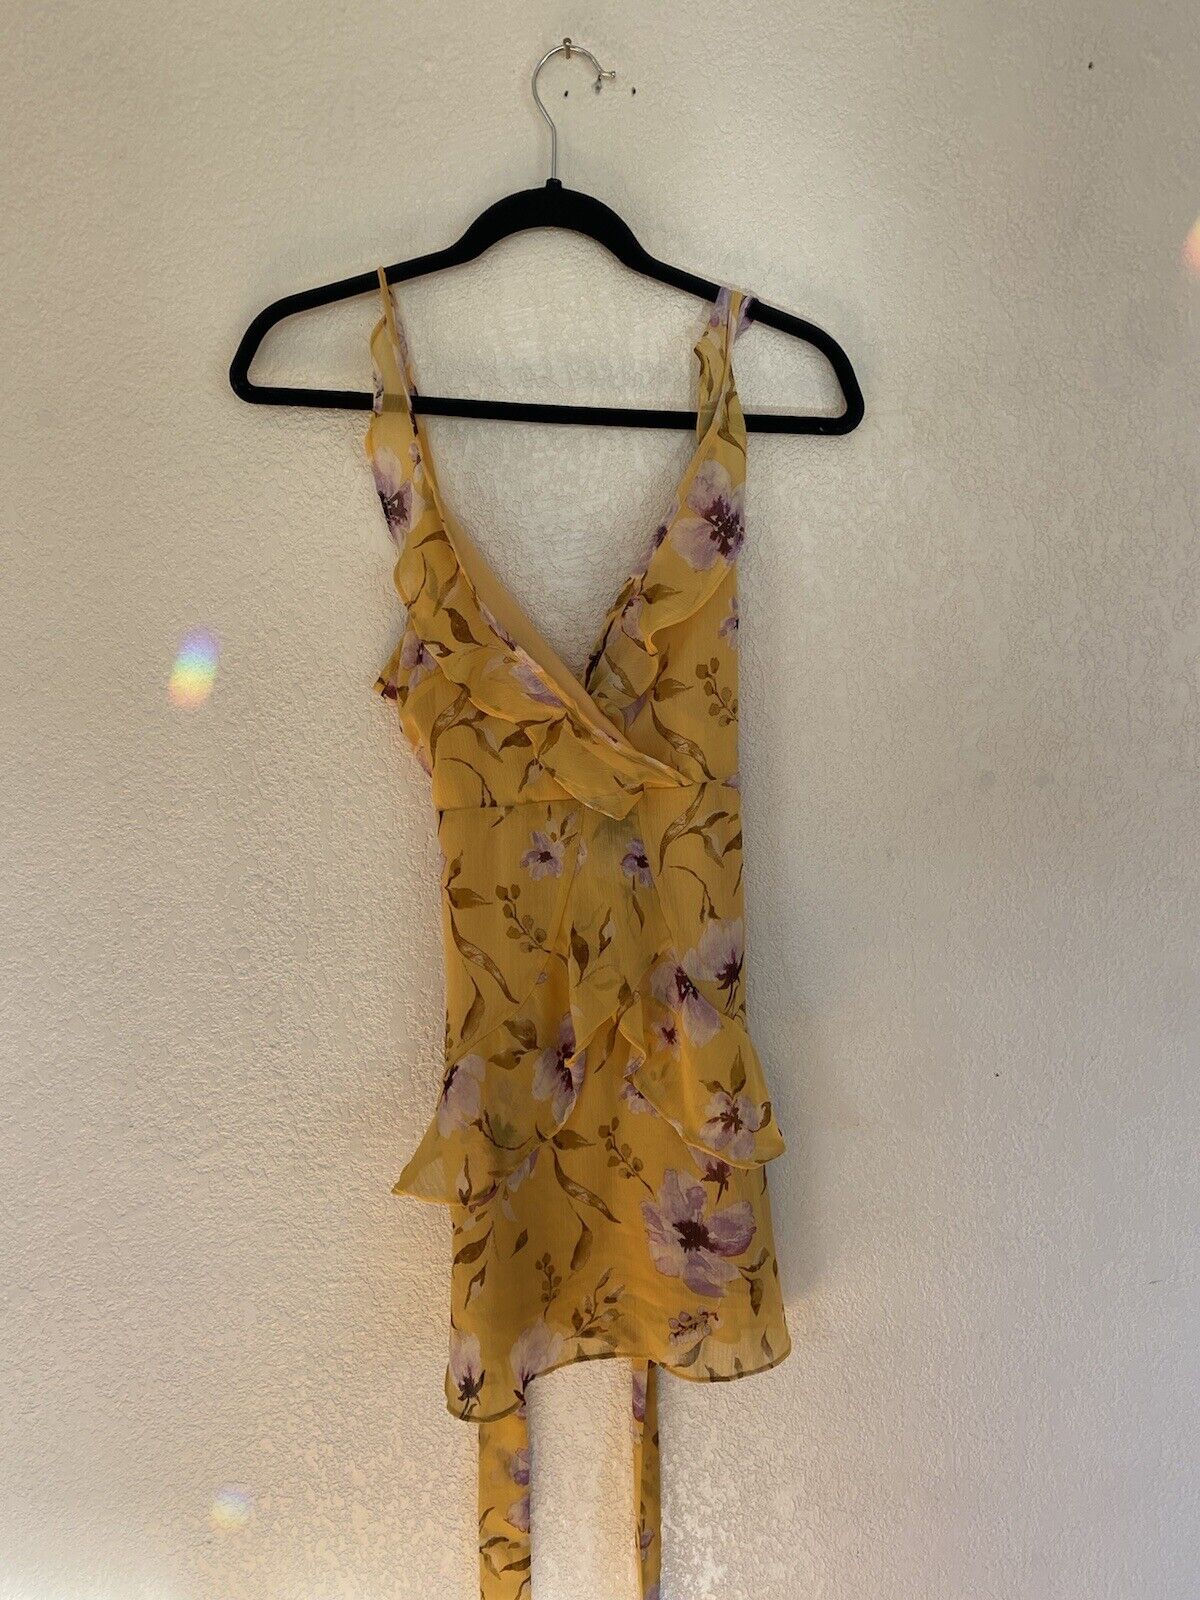 Yellow Floral Wrap Dress - Unbranded - Women's Small # 2196